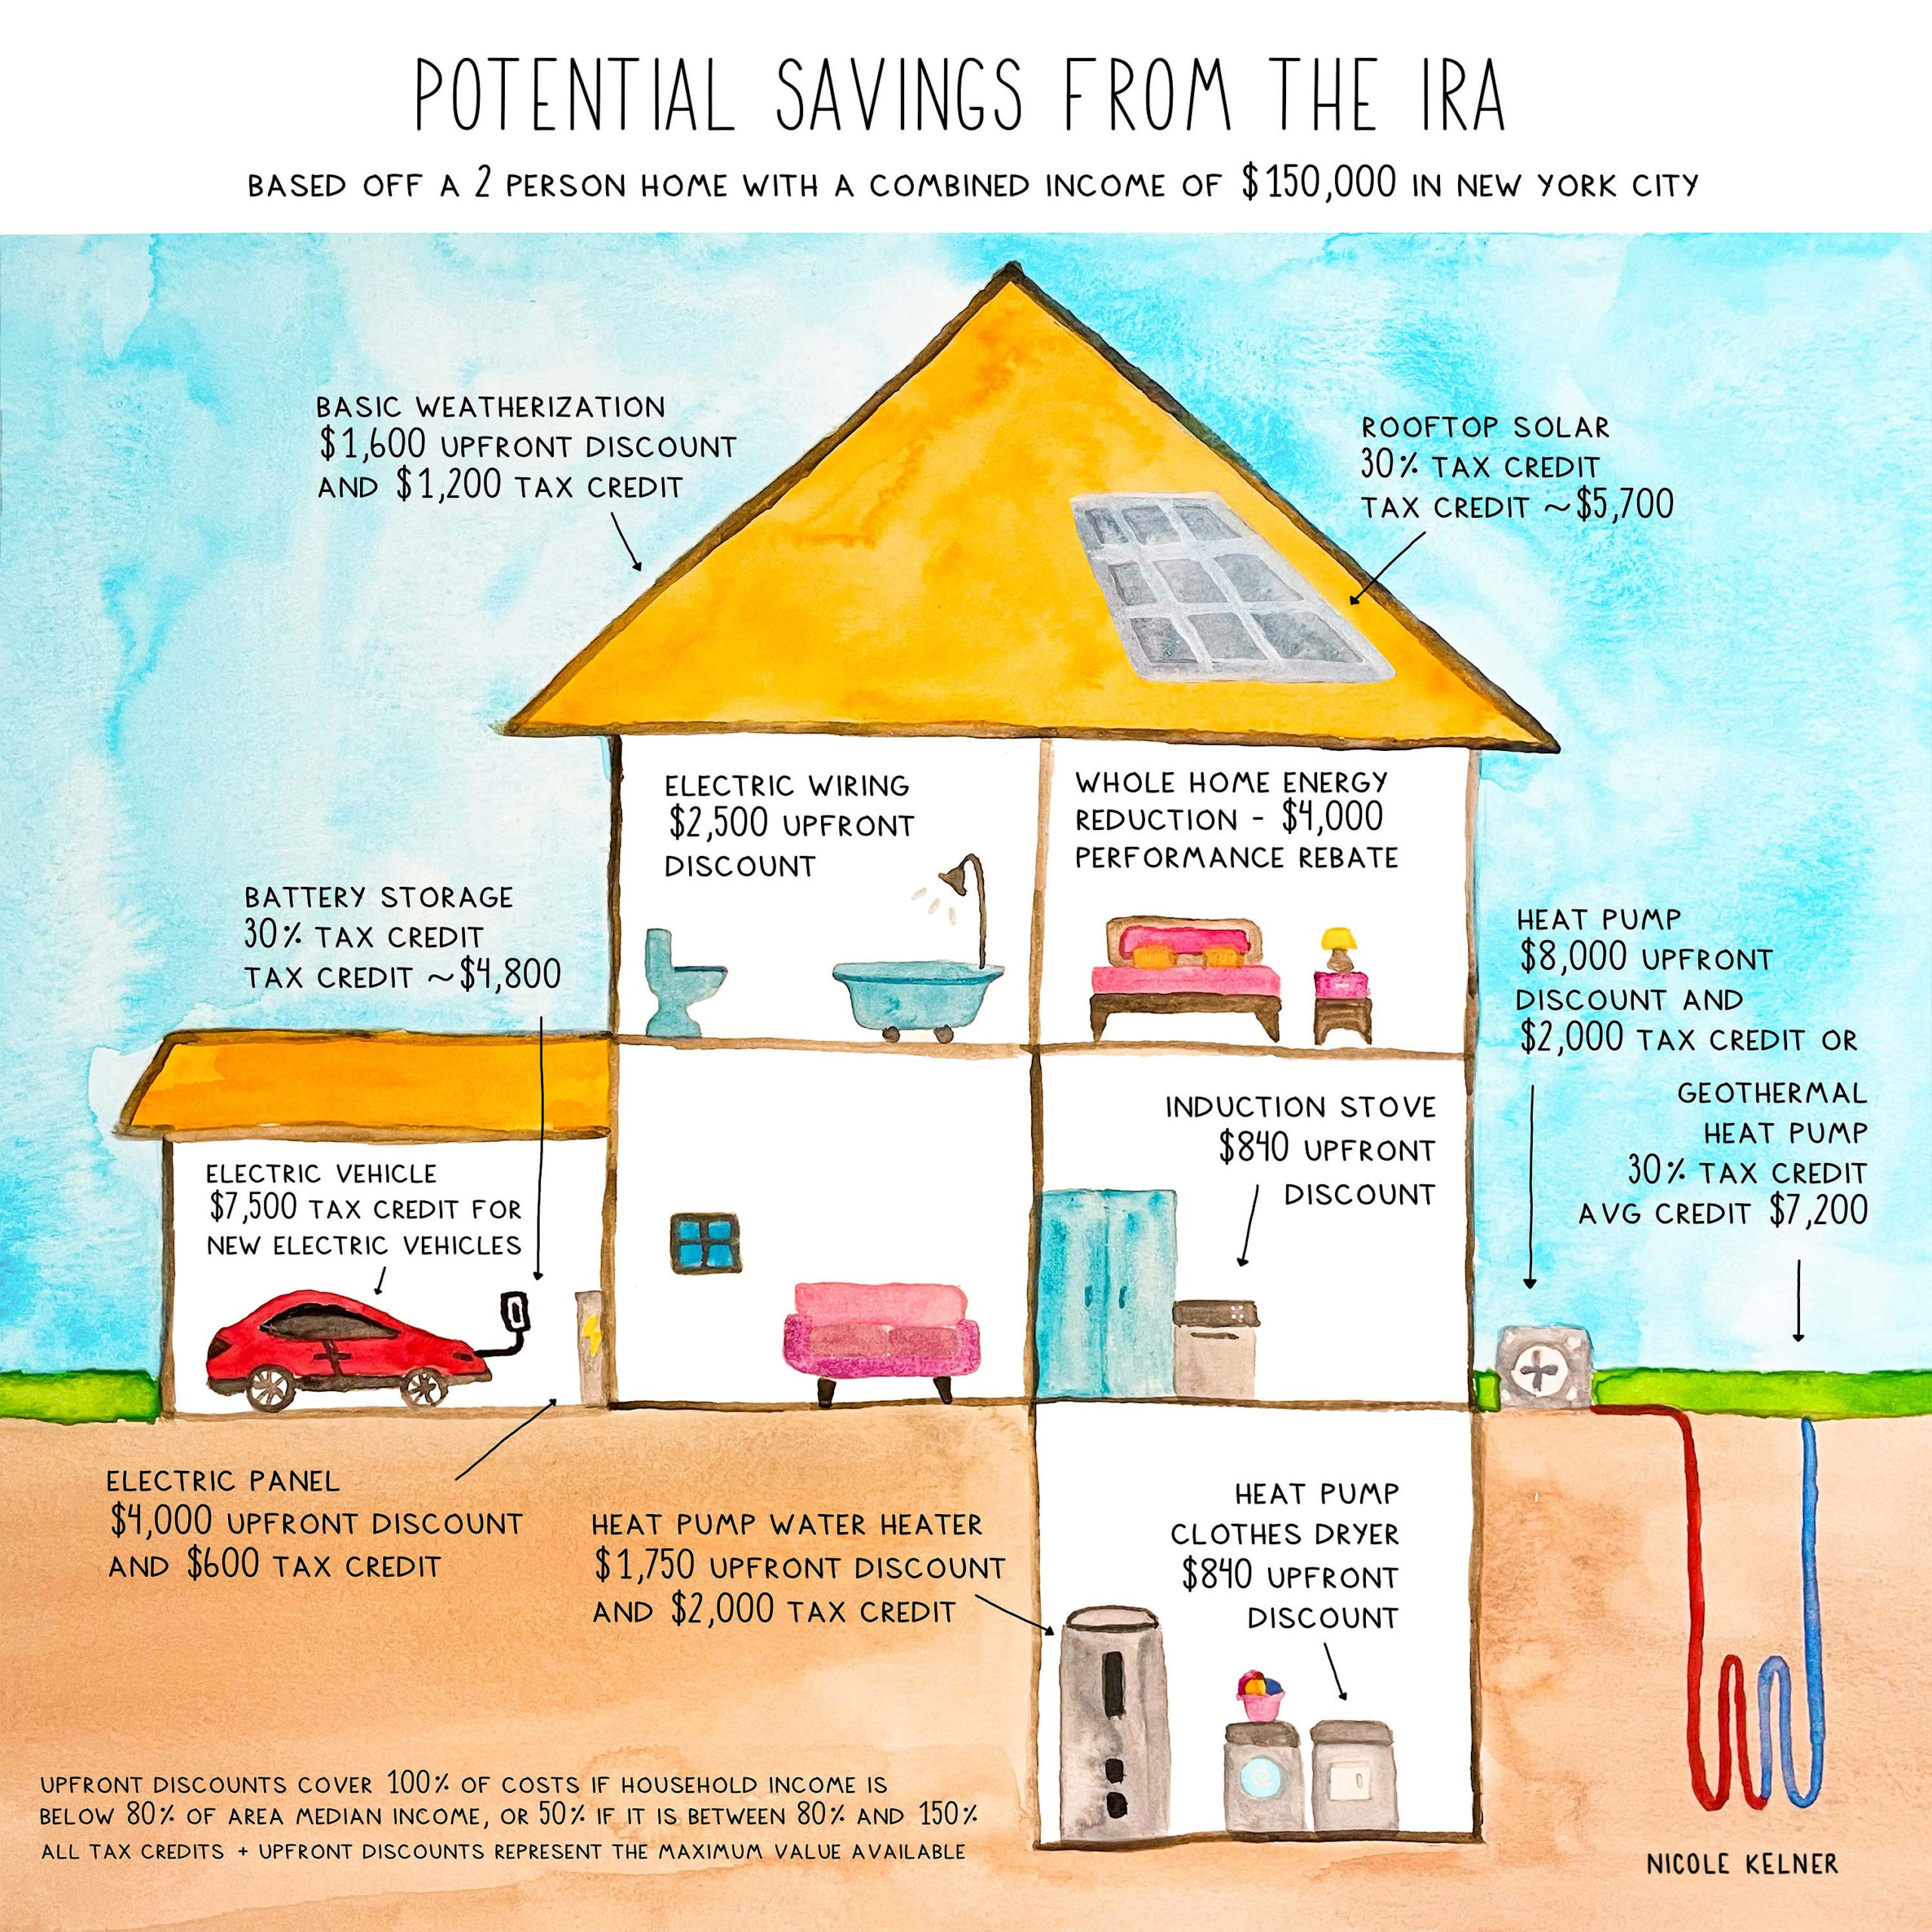 A comic shows the potential savings that a household could get from the IRA, labeling different appliances with their tax credit and financial rebate amounts as incentives for going electric.